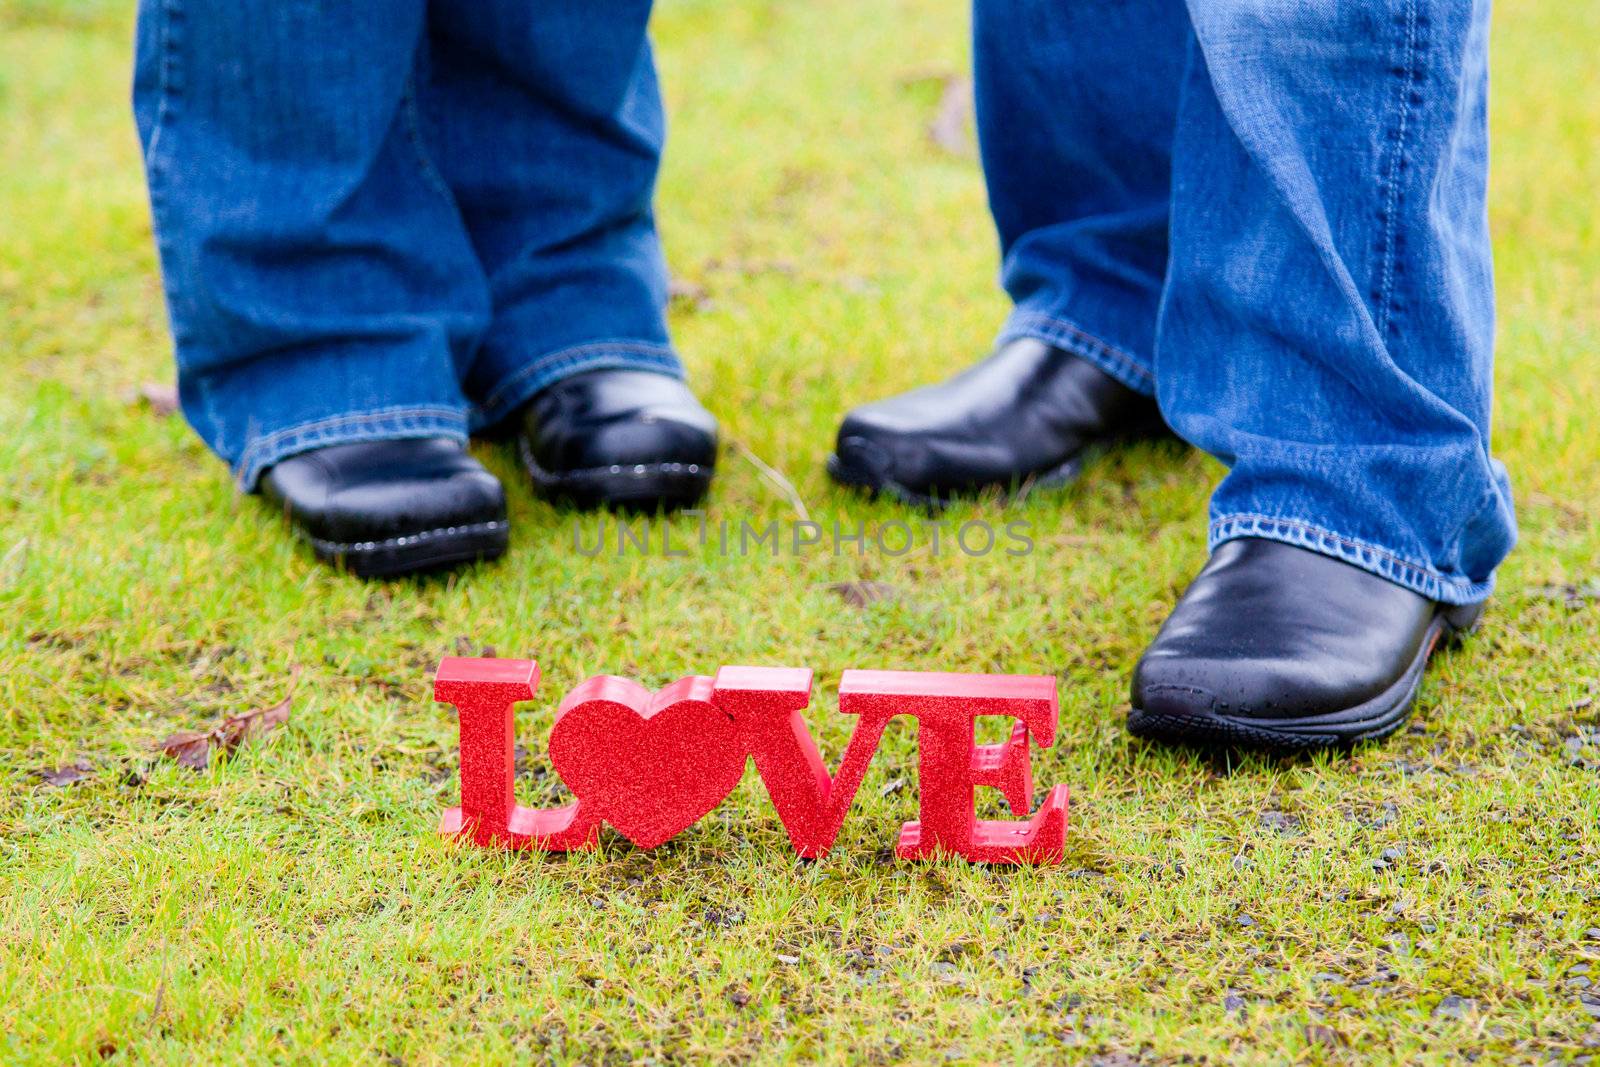 The feet of a couple with the word "love" in red on the green grass.